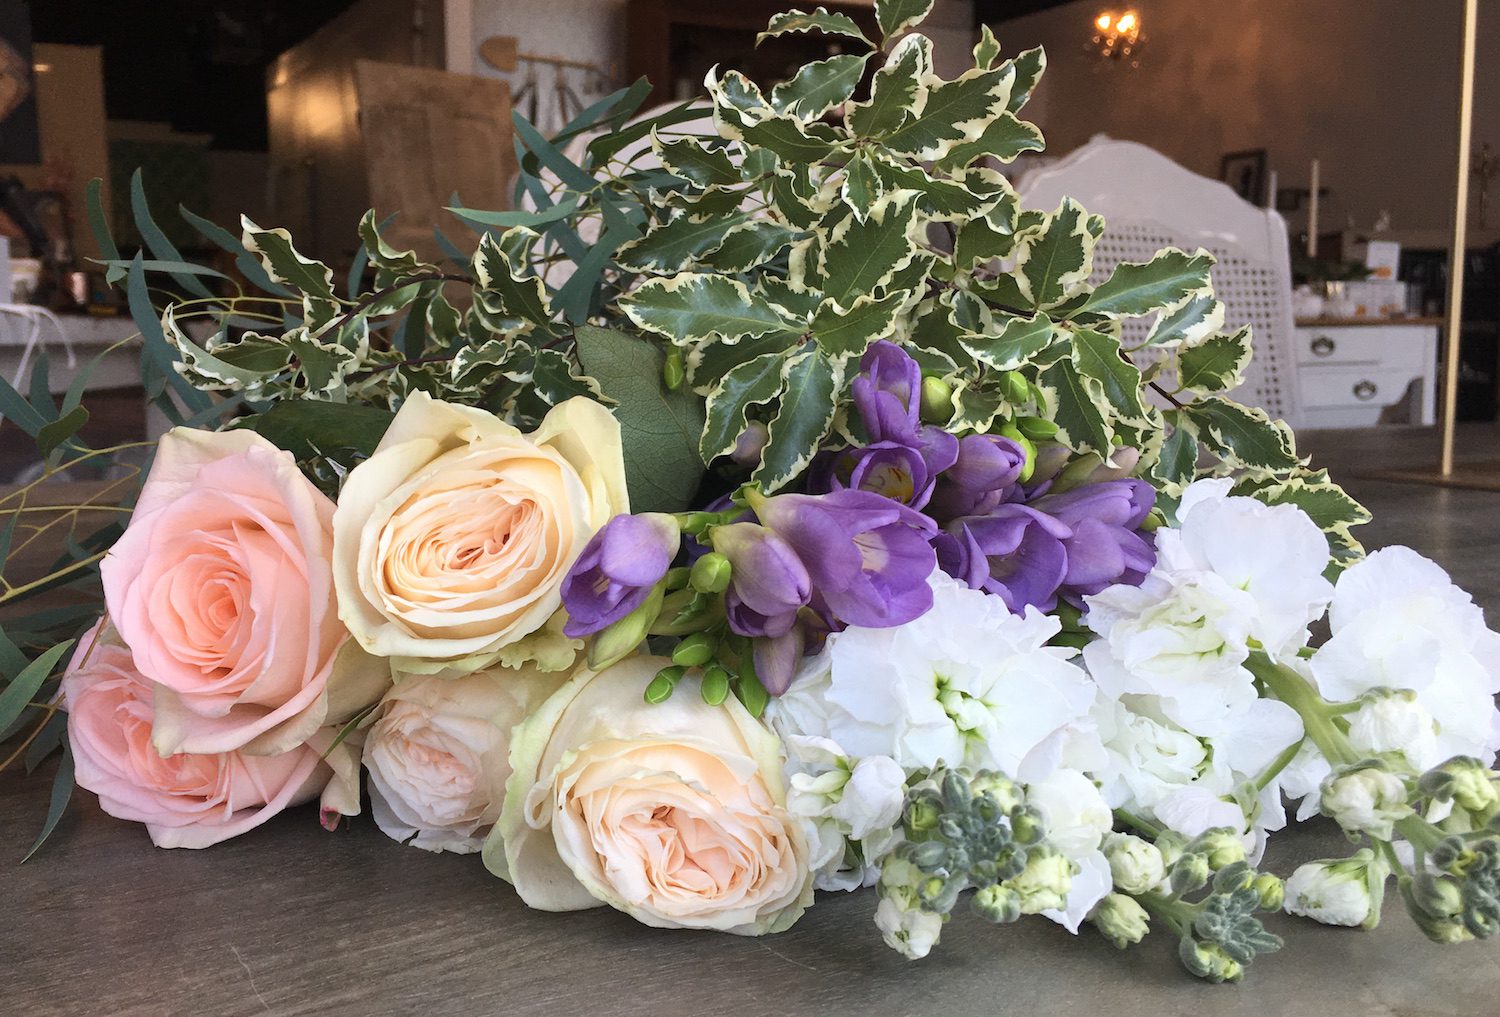 From left to right: Peach roses, cream Garden Roses, purple Freesia, white Stock. On top Feathered Eucalyptus and Variegated Pittosporum.